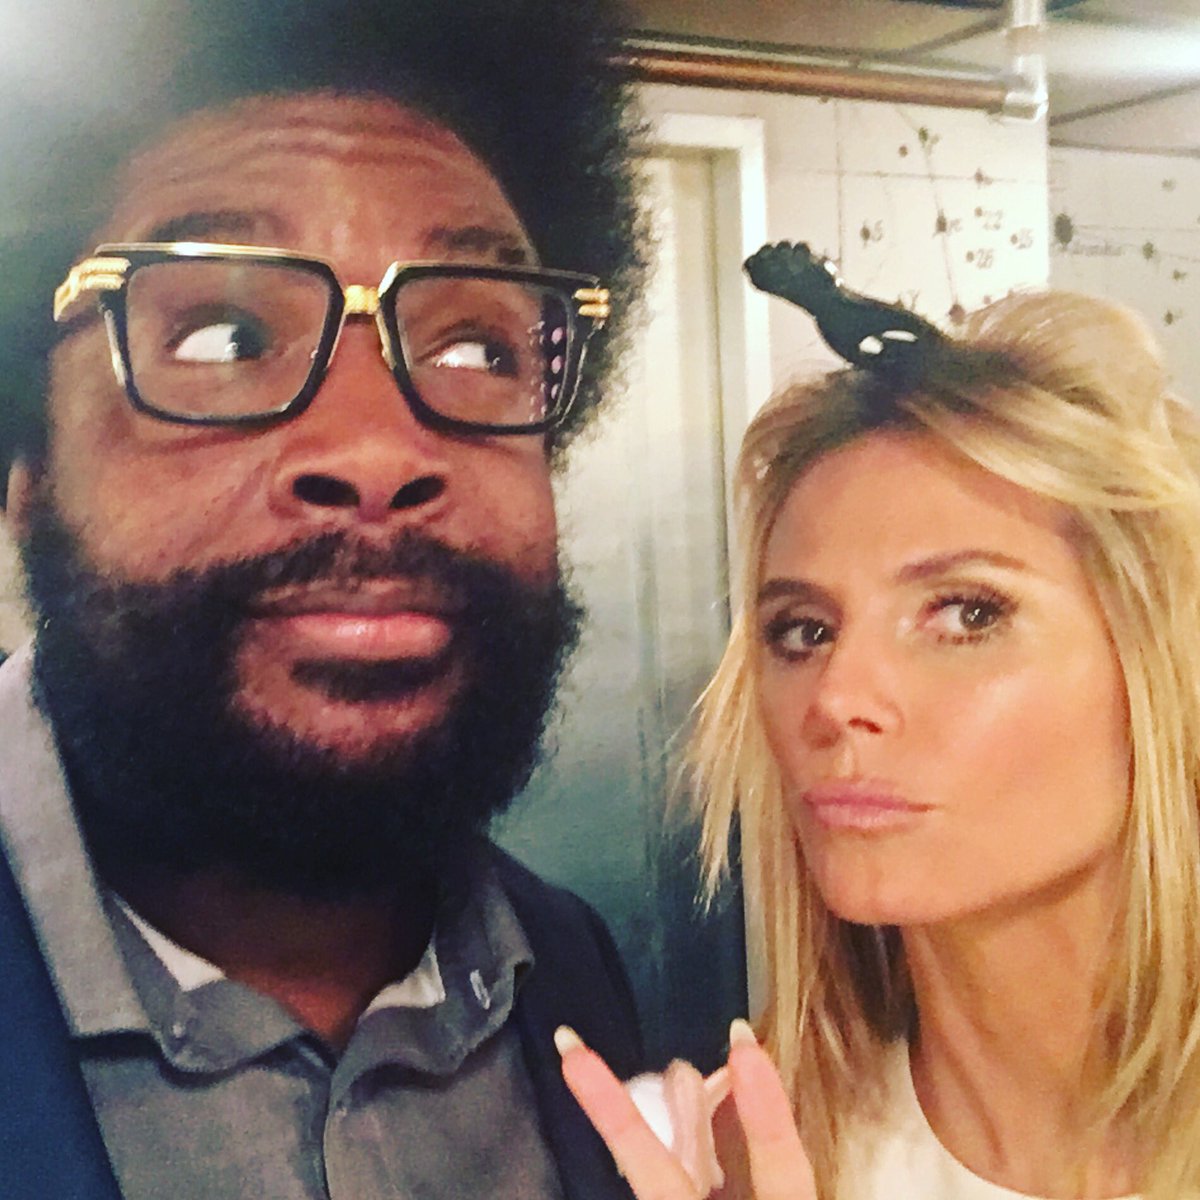 Hanging with @questlove at @FallonTonight and yes, I'm keeping the pick!! https://t.co/WqptqwUQPj